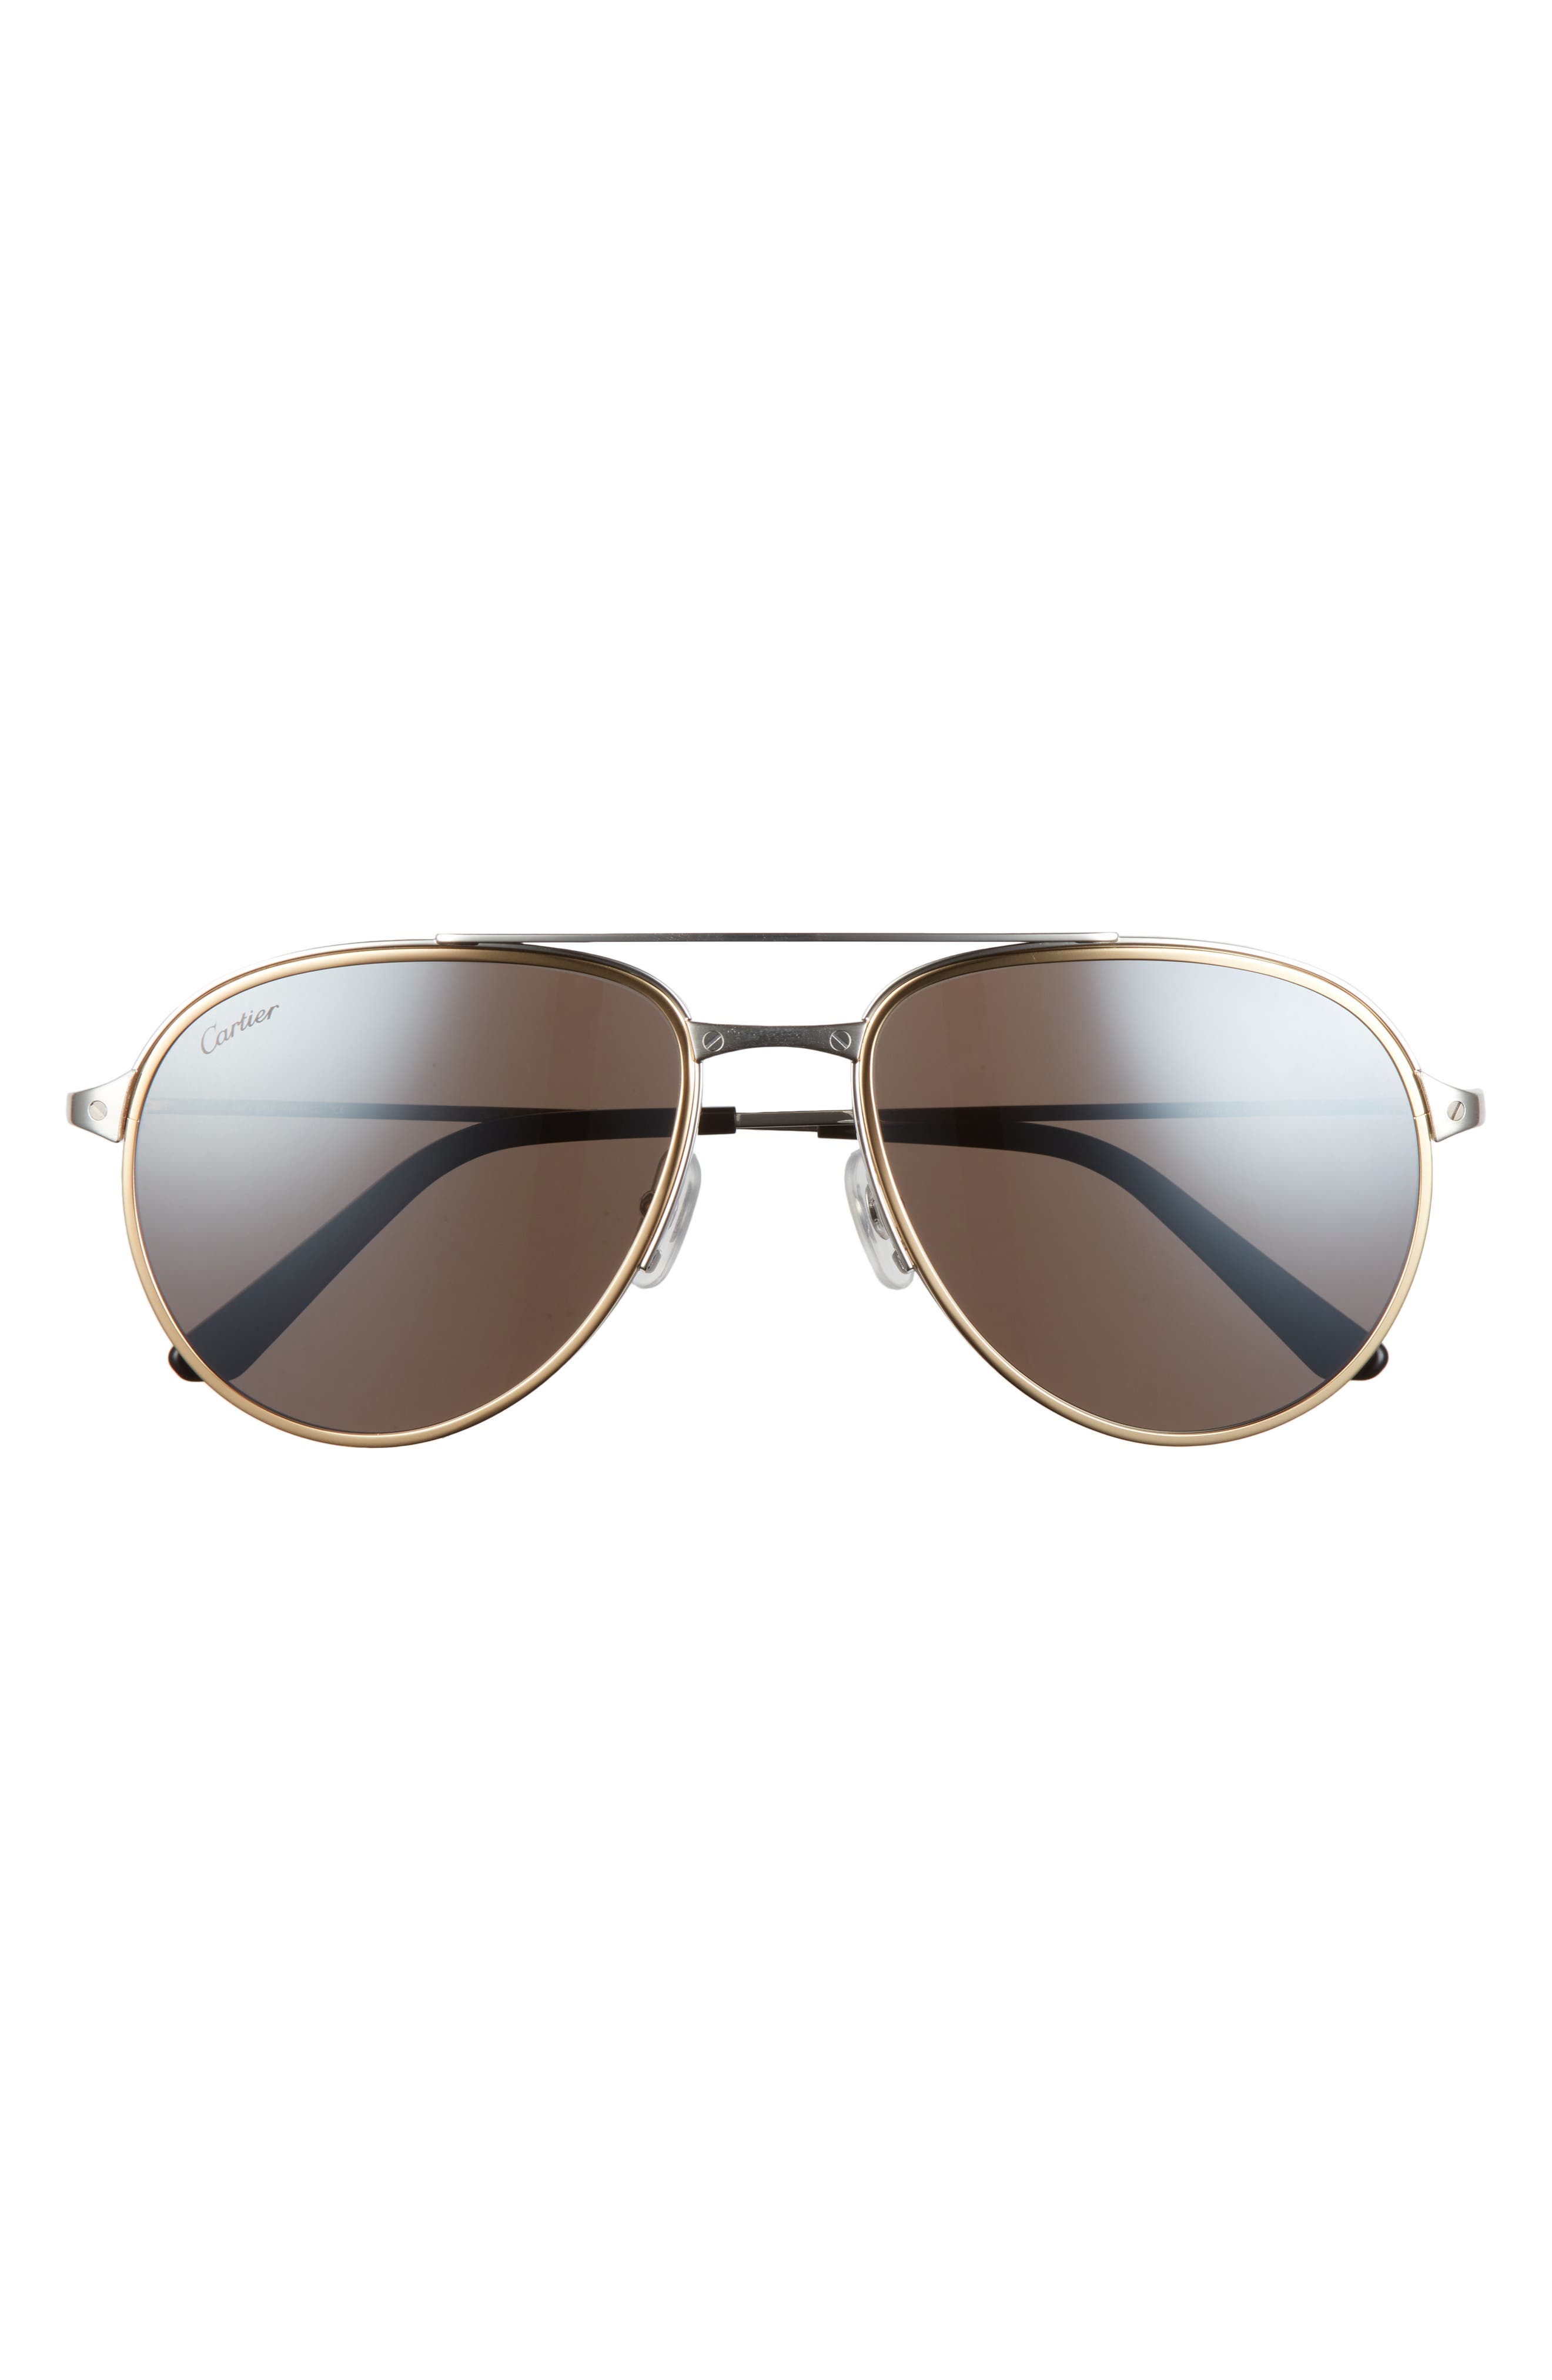 Cartier 58mm Polarized Aviator Sunglasses in Silver at Nordstrom